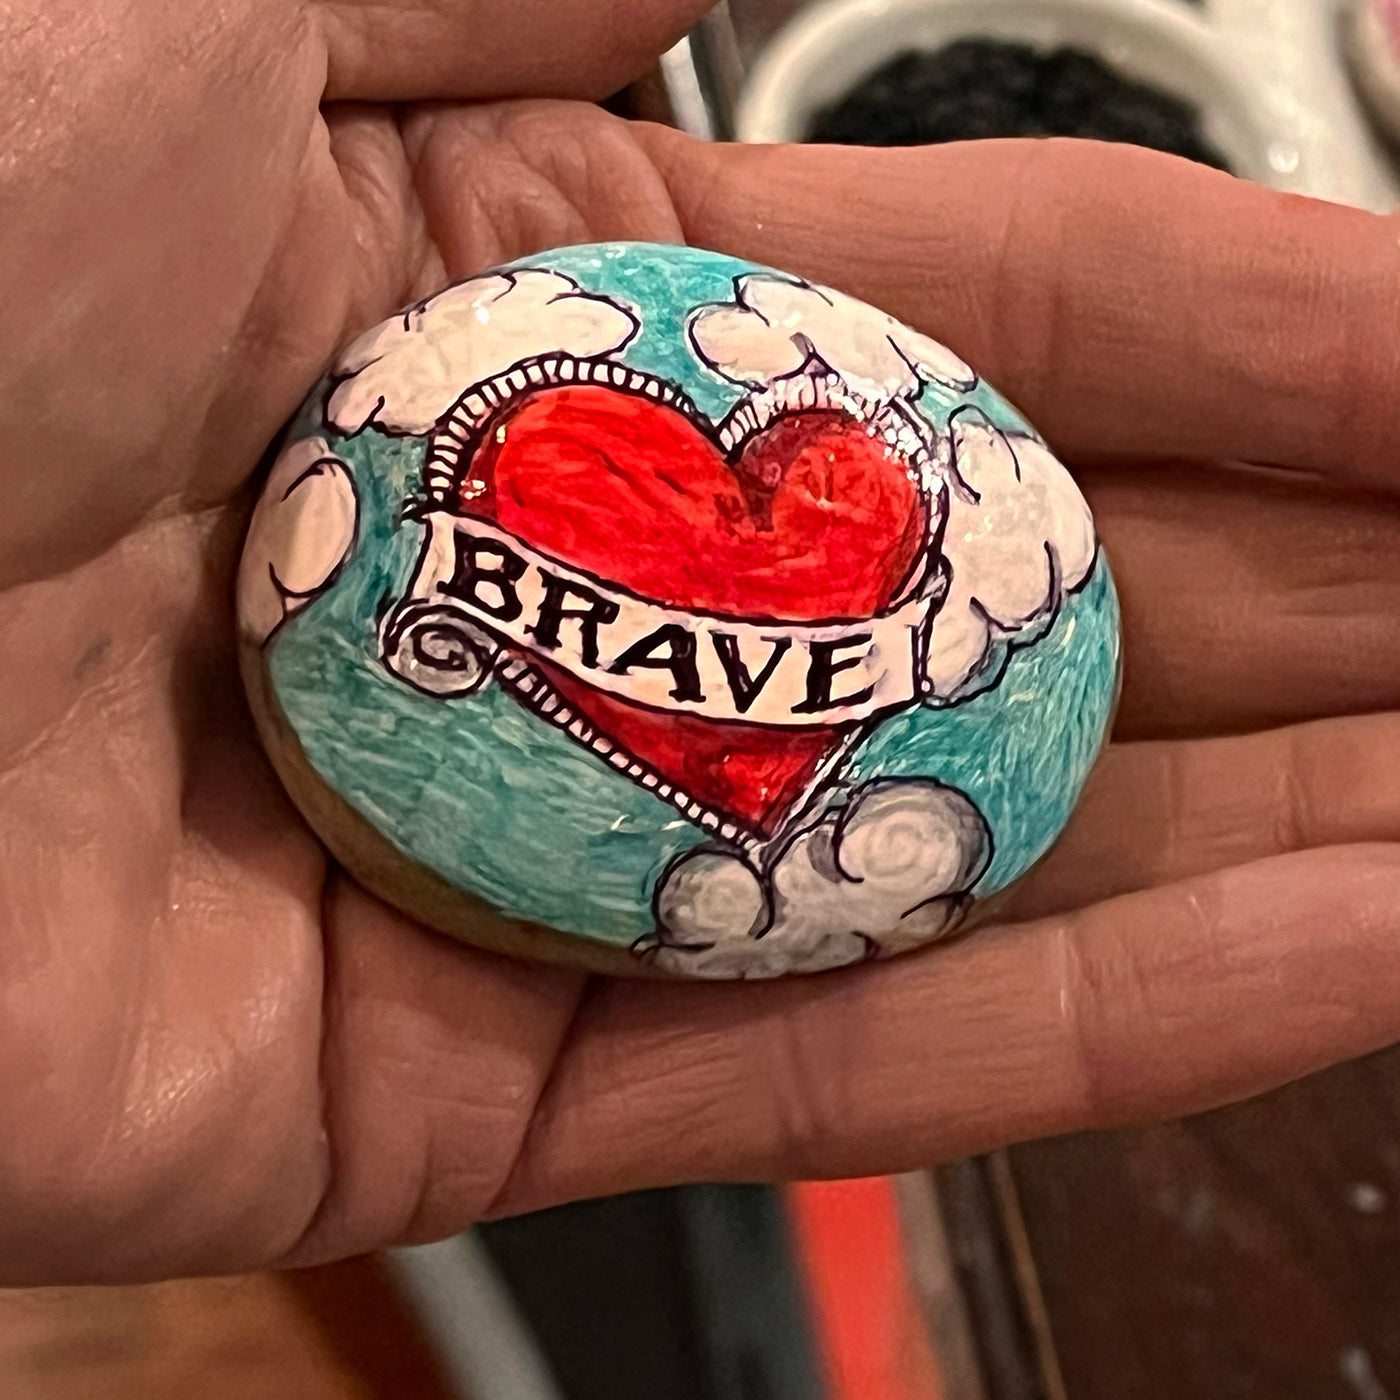 Hand painted stone - - "Brave heart"